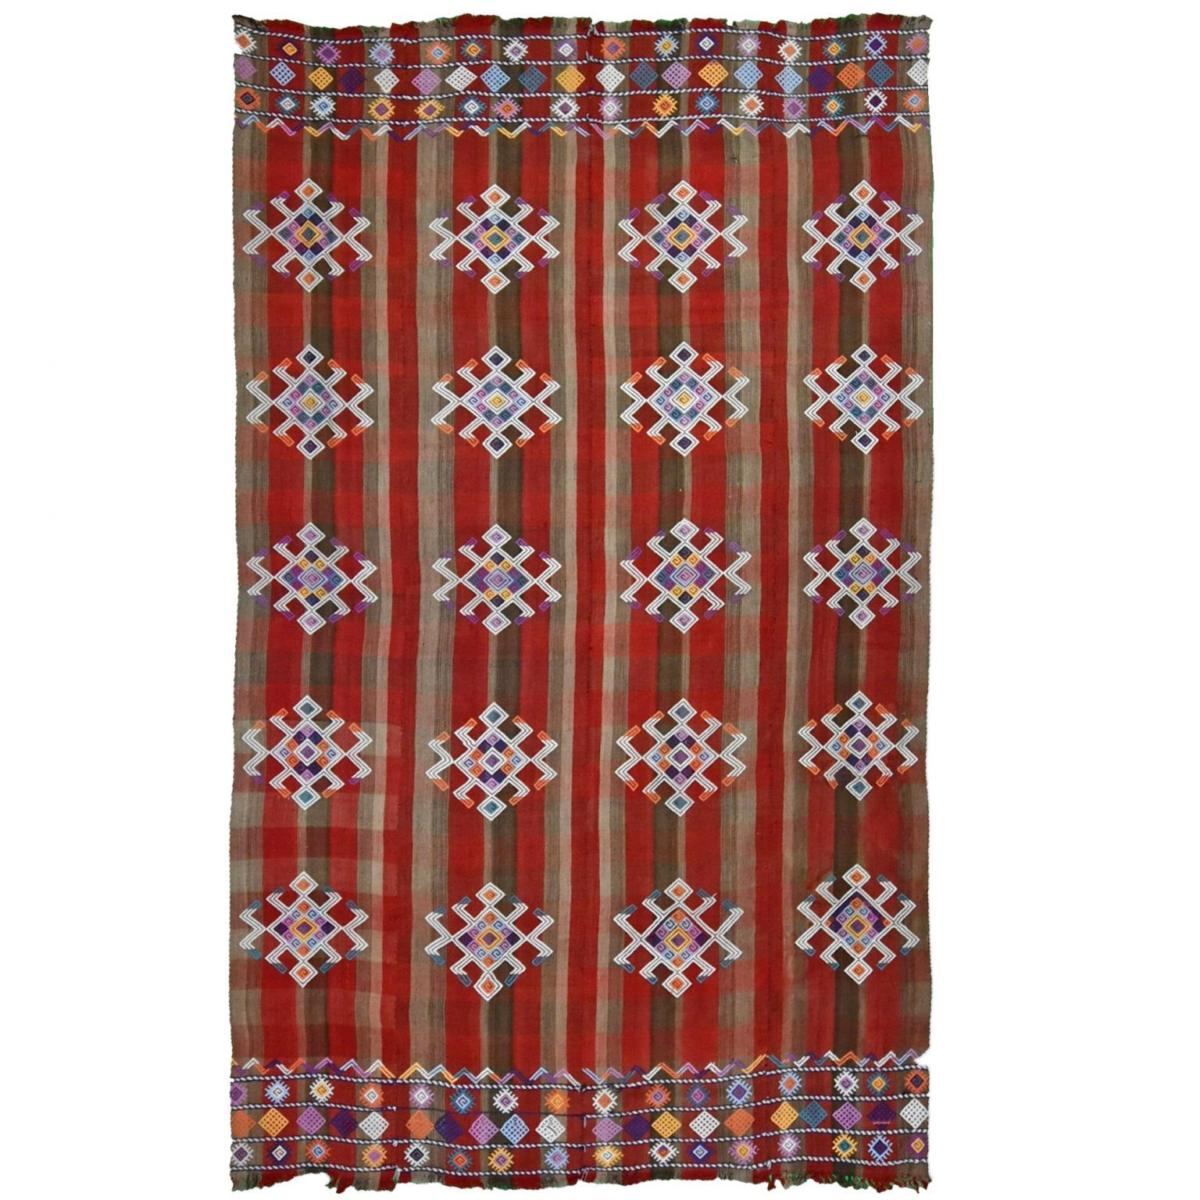 Vintage Kilim 10’6″ x 6’3″ In Good Condition For Sale In Sag Harbor, NY